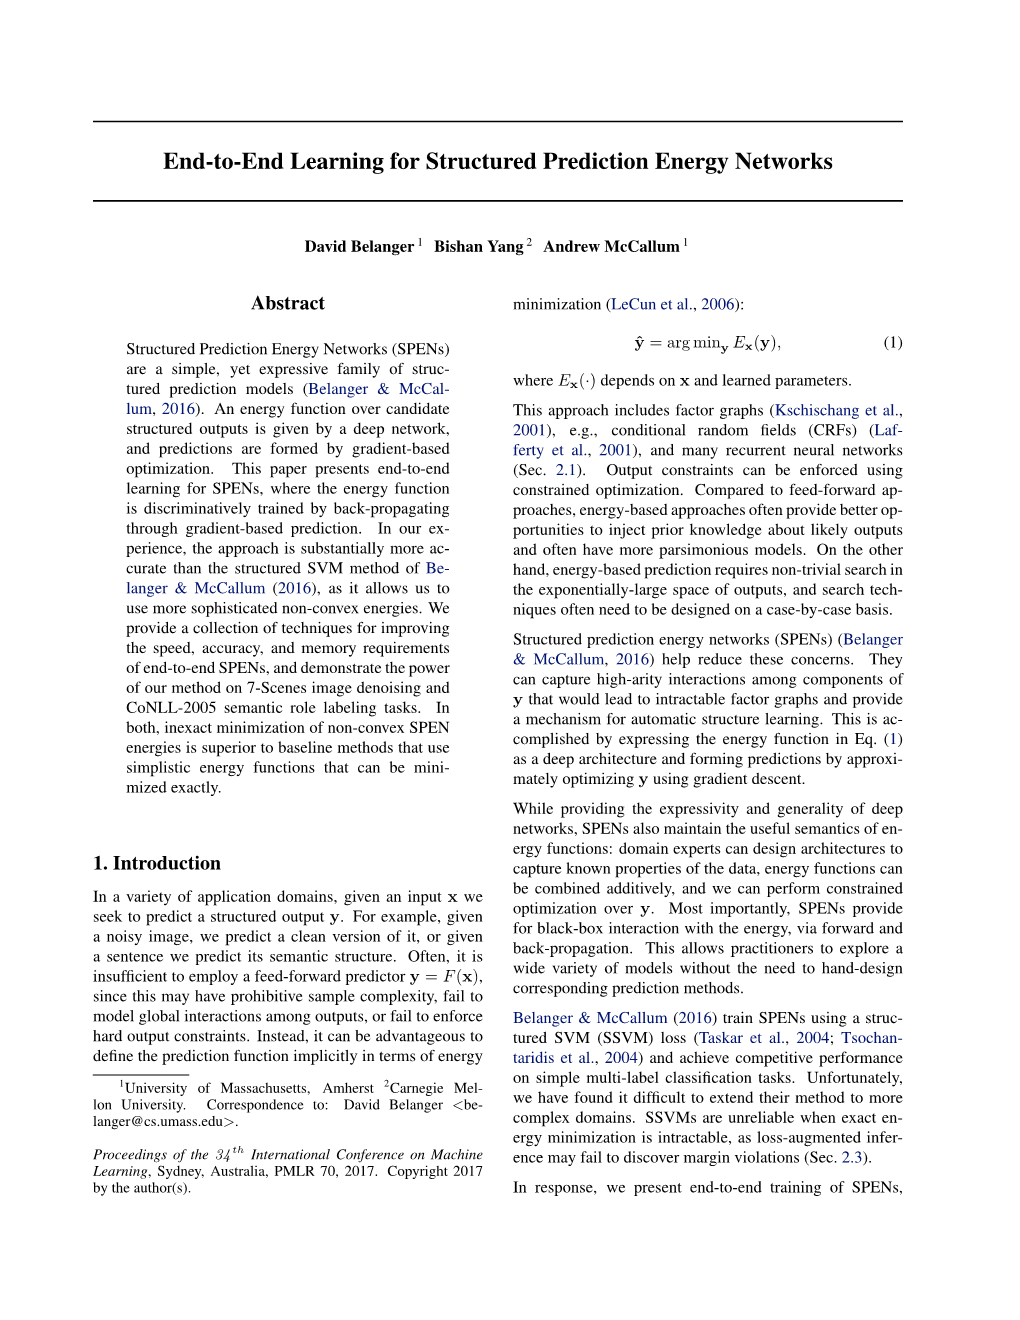 End-To-End Learning for Structured Prediction Energy Networks